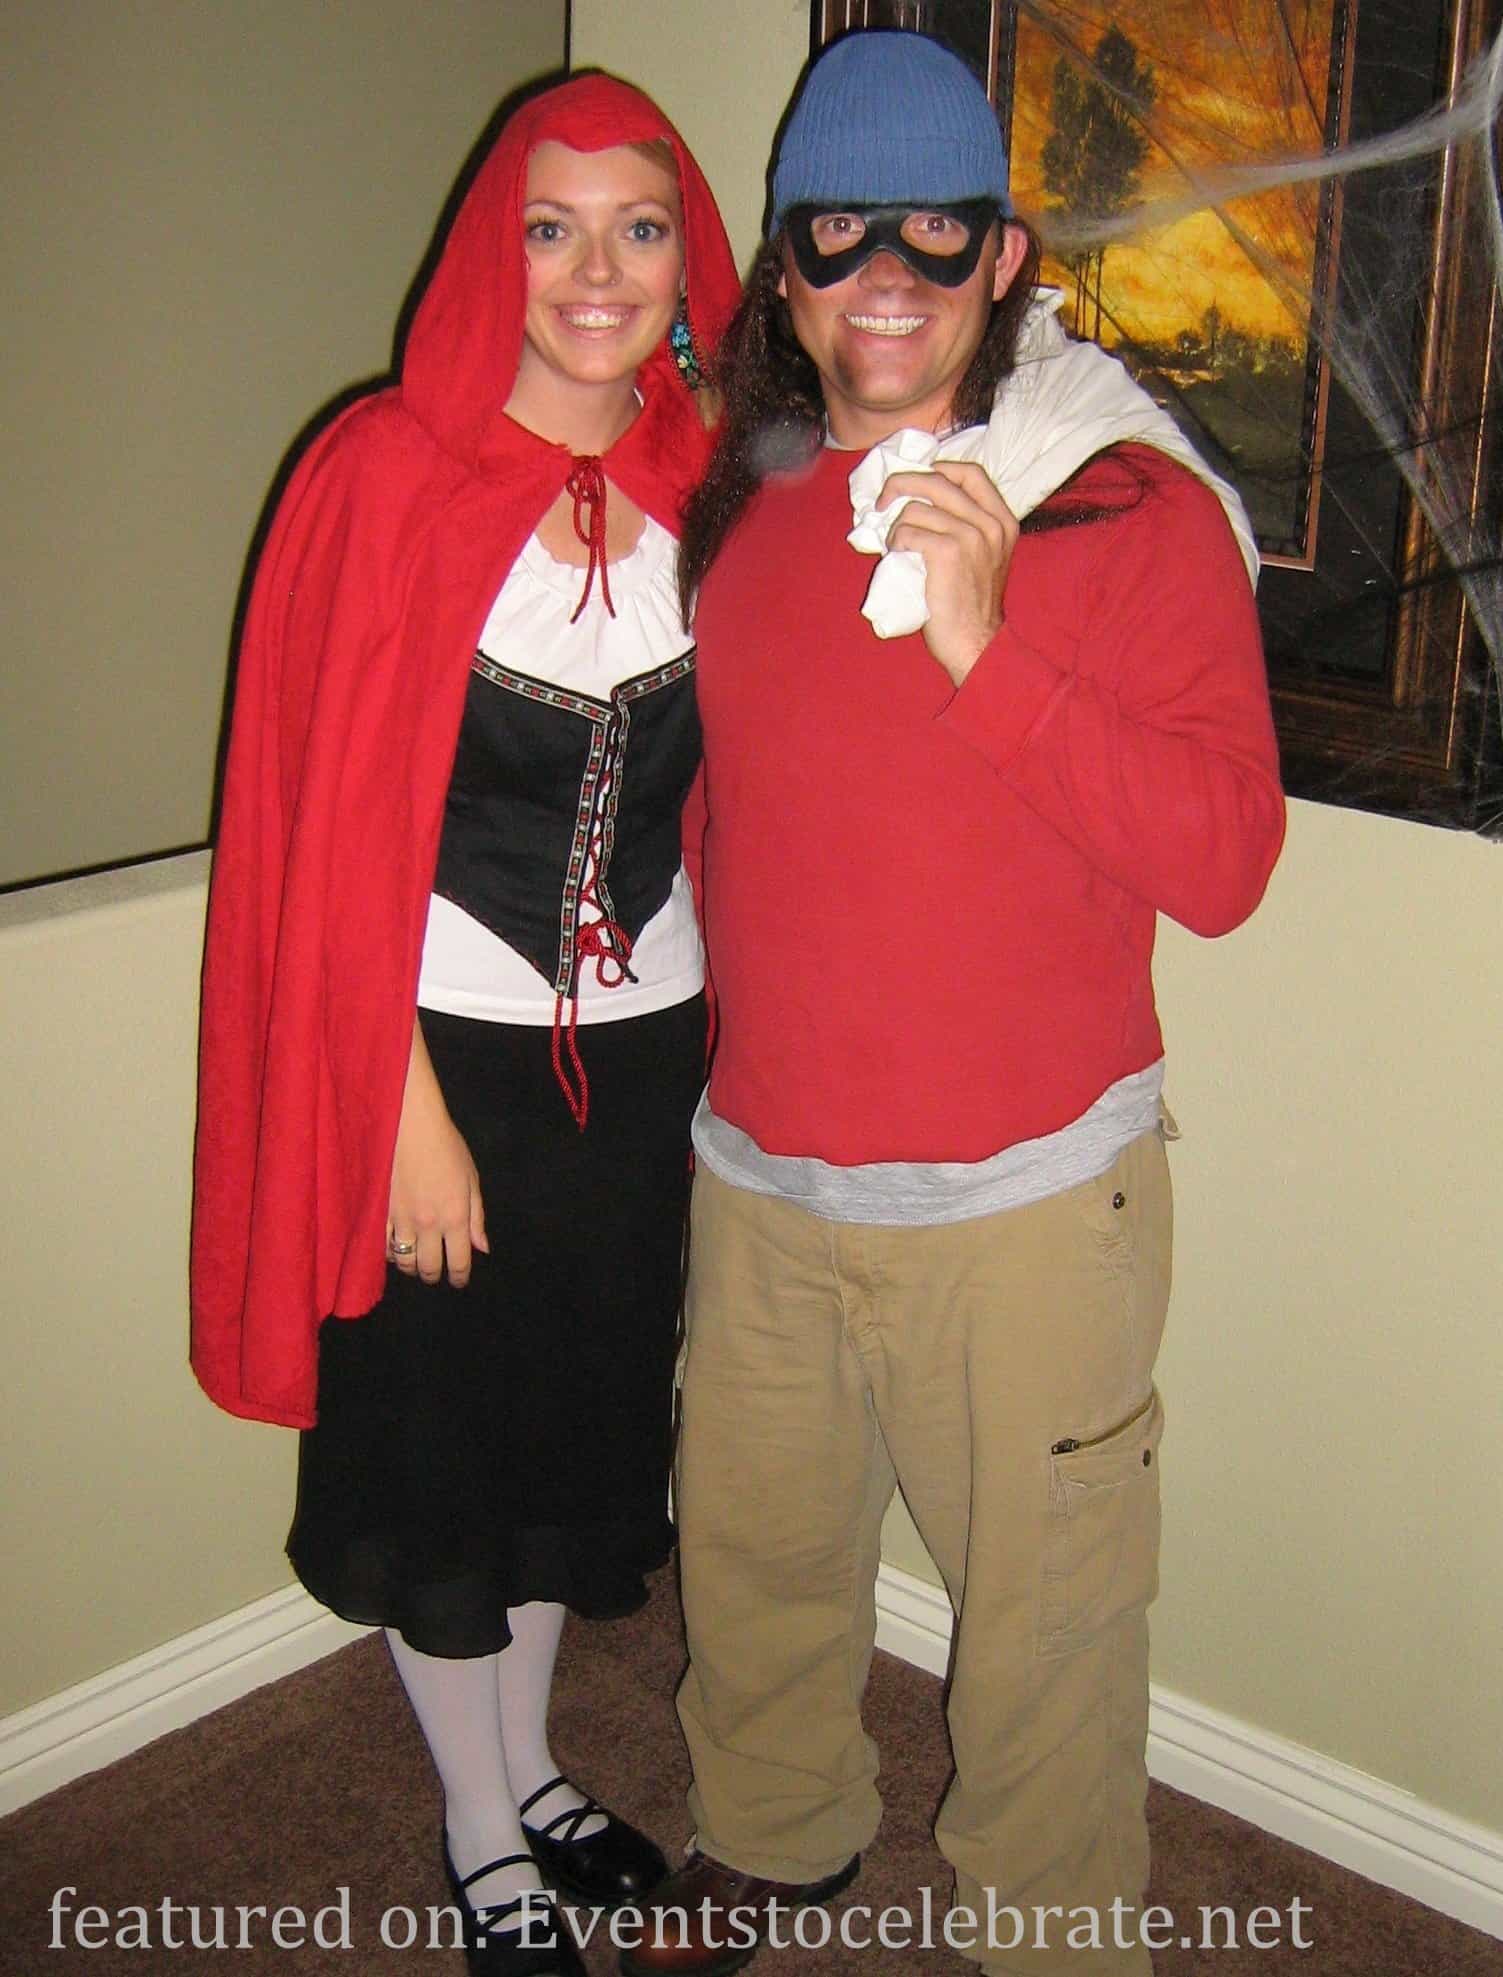 Red Riding Hood Robber Halloween Costume